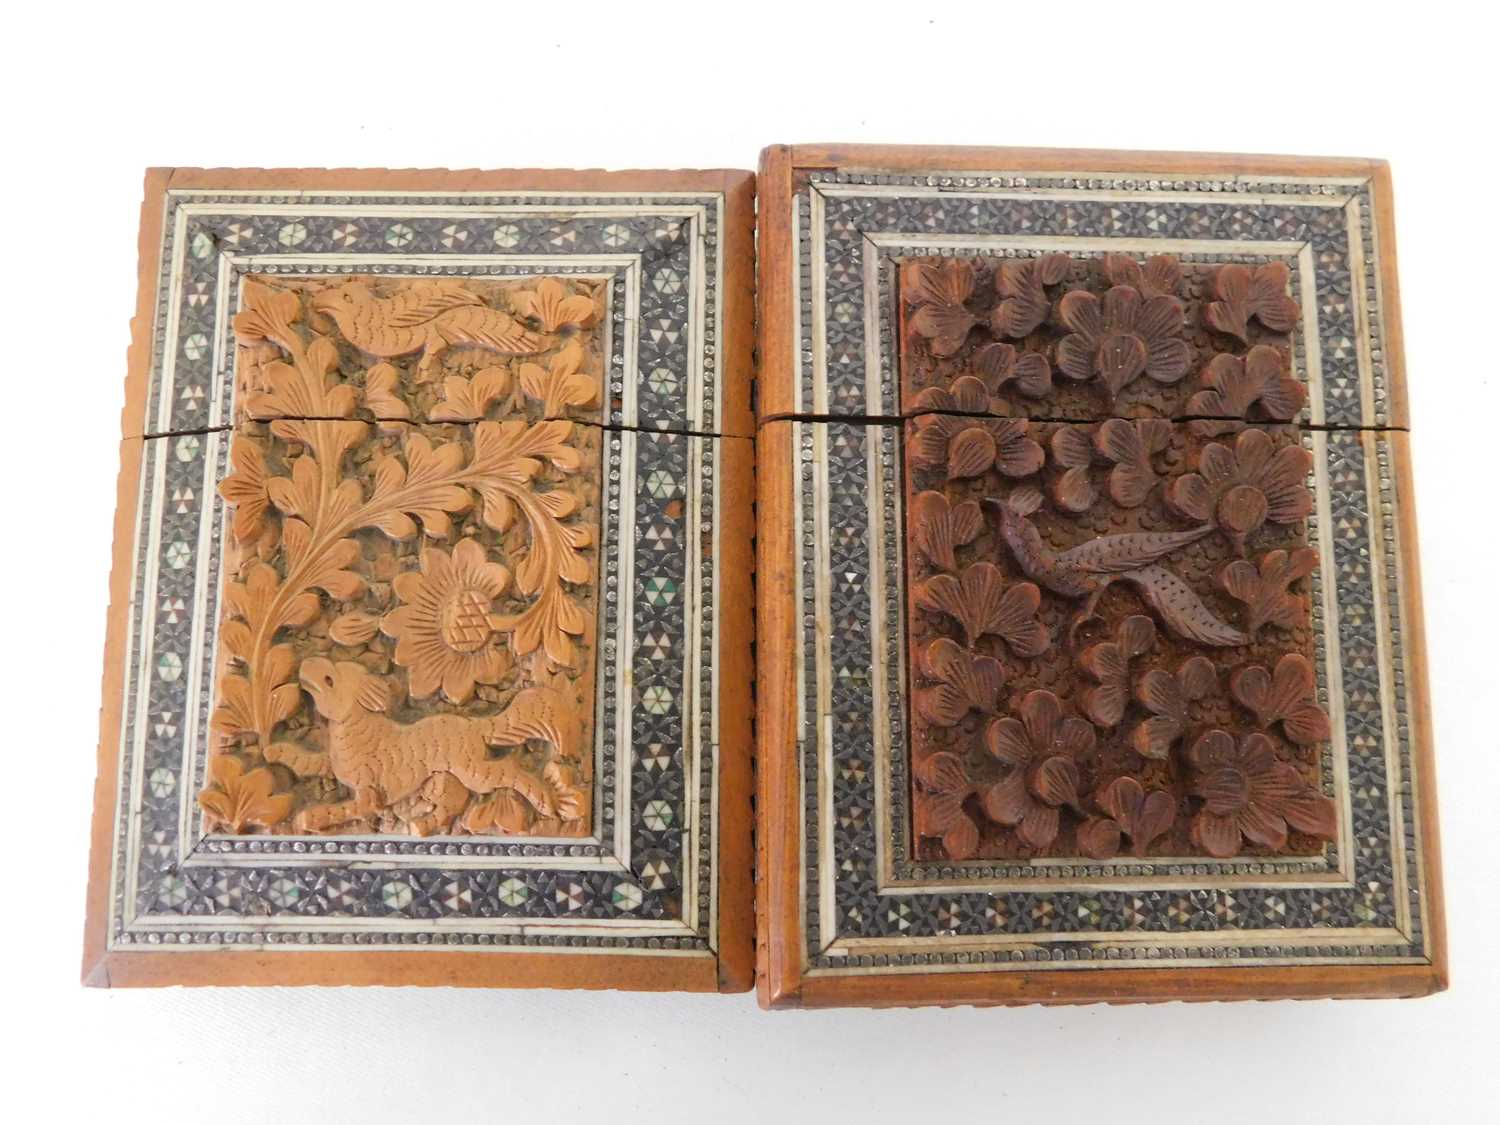 Two 19th century Indian carved sandal wood and sadeli card cases, each central panel carved in